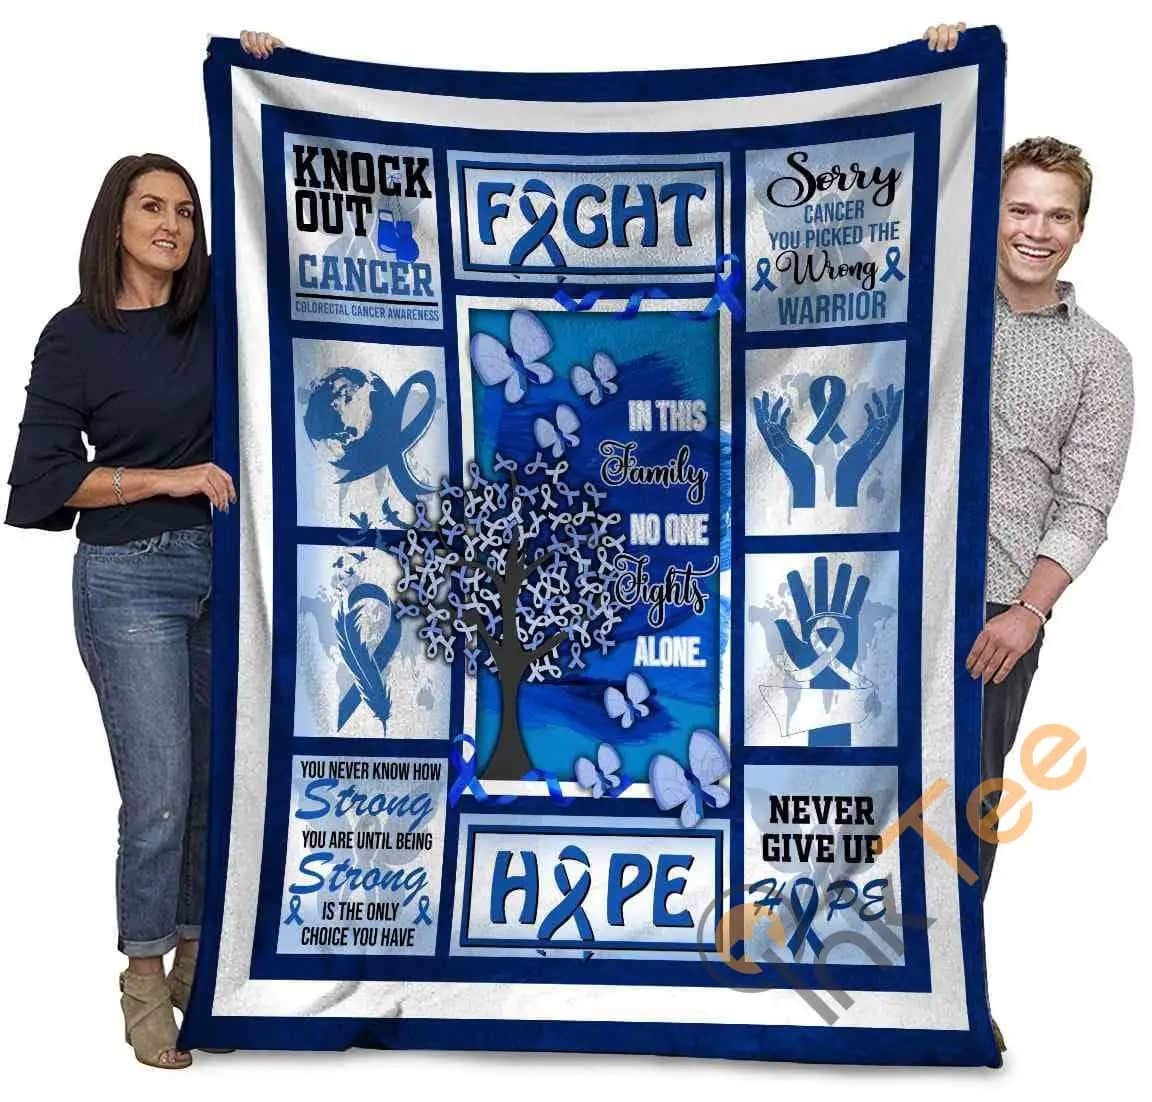 Colorectal Cancer Awareness In This Family No One Fights Alone Ultra Soft Cozy Plush Fleece Blanket